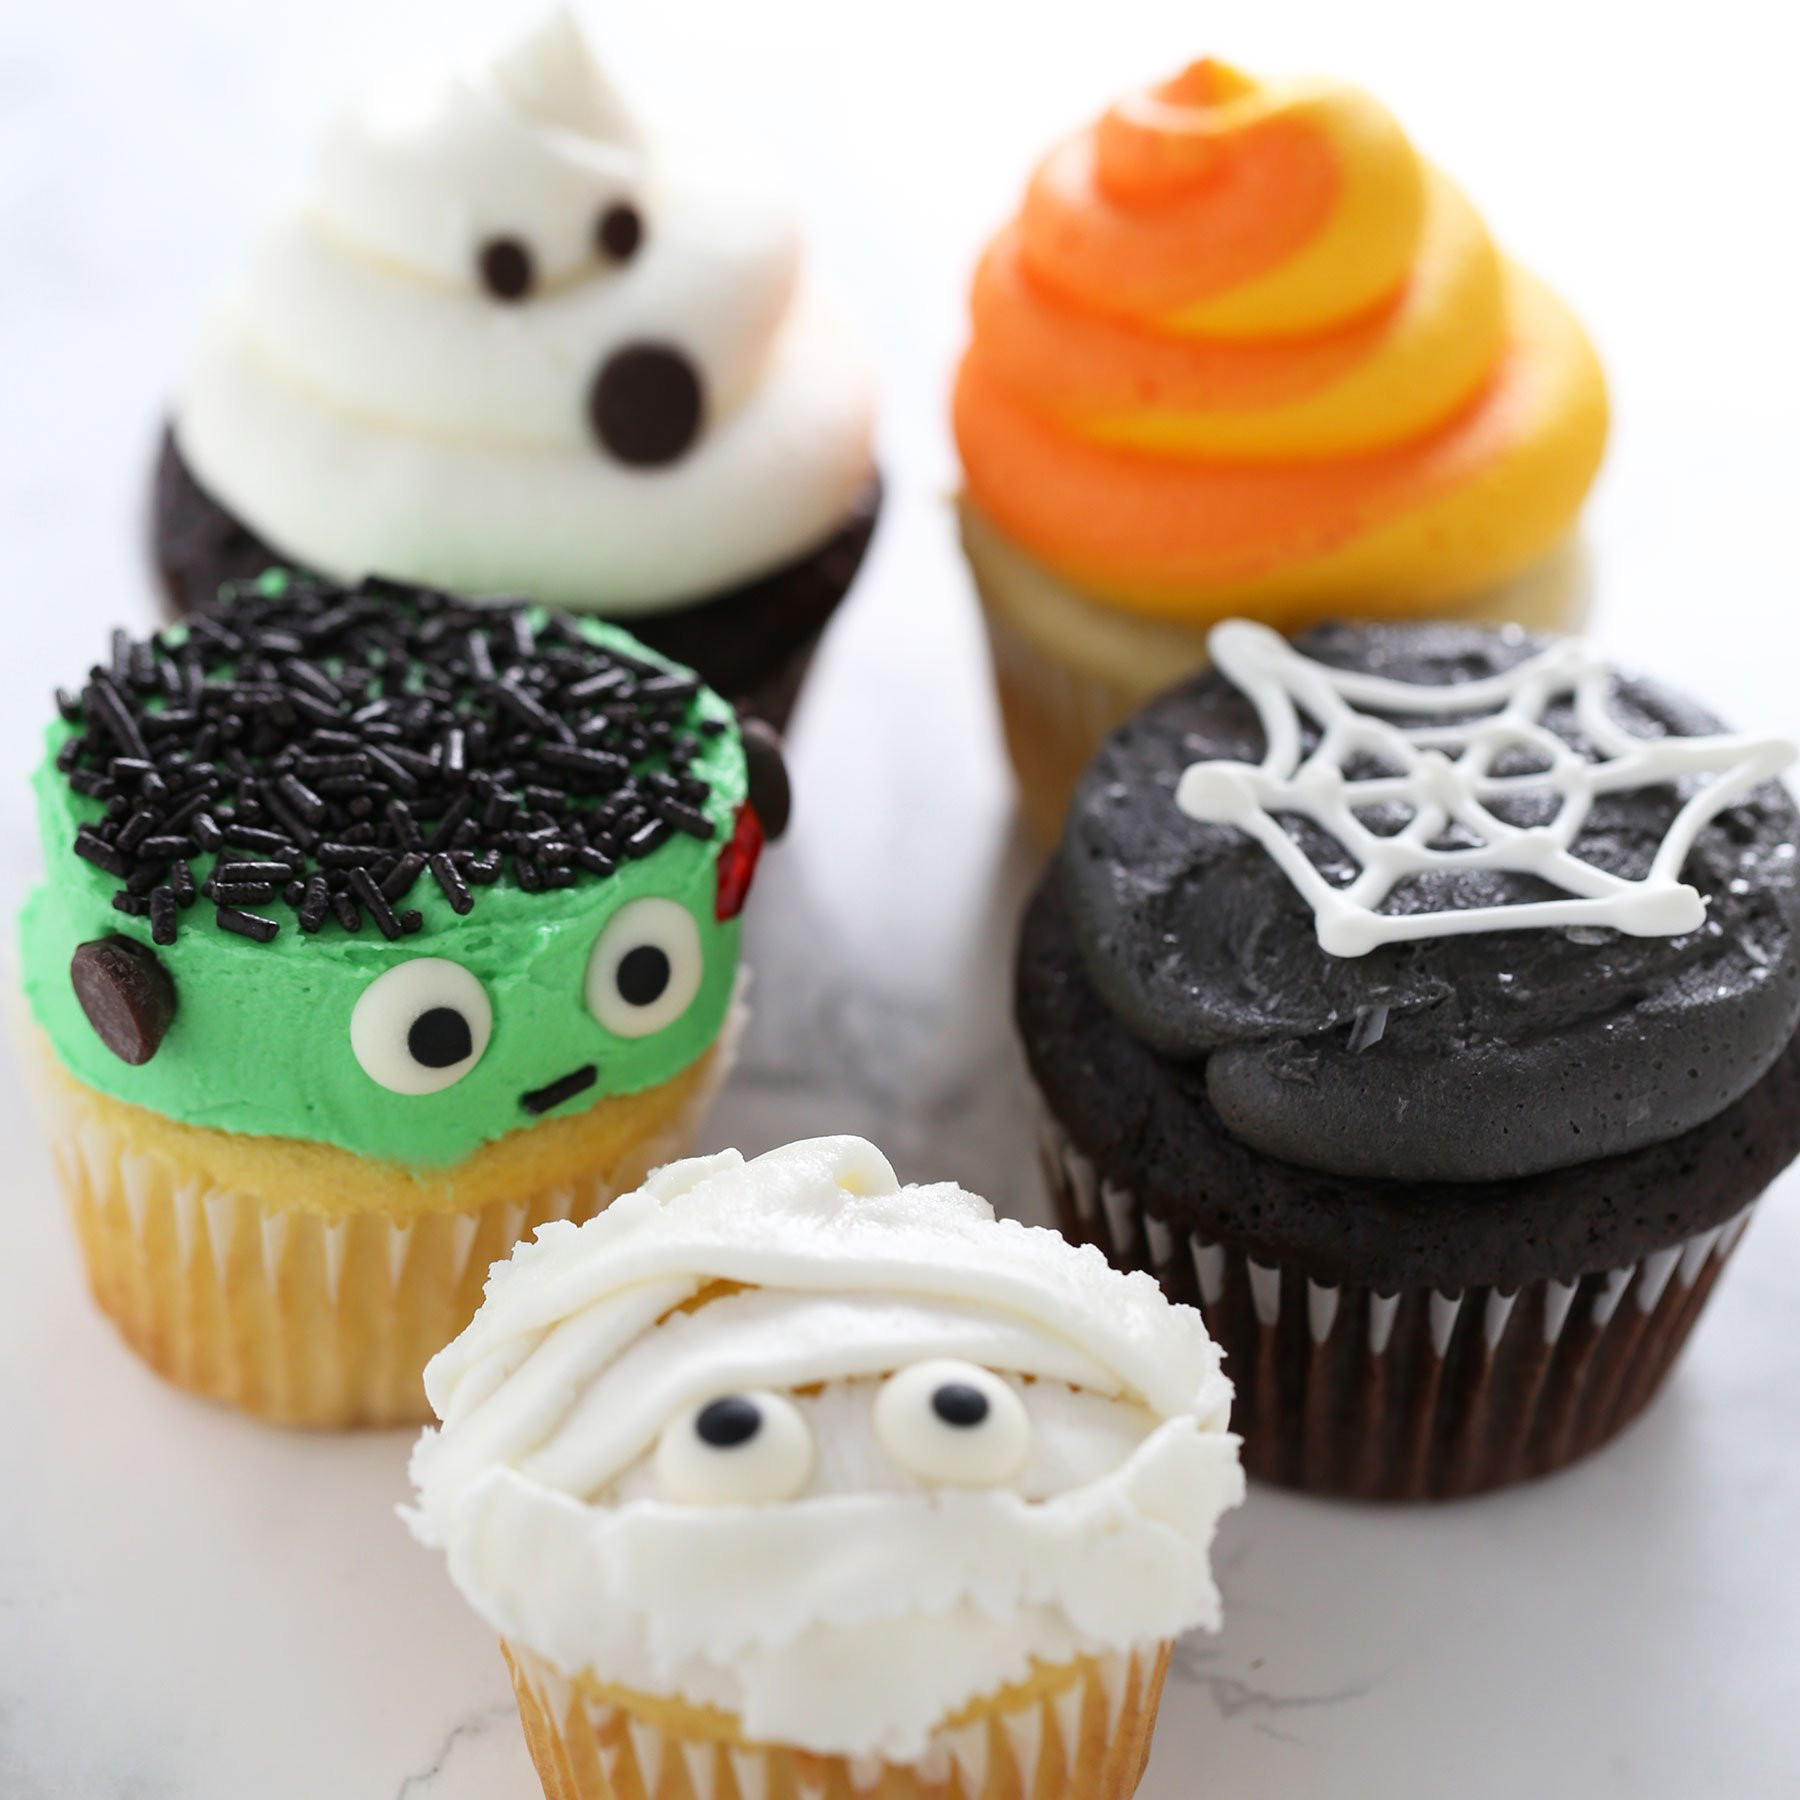 Halloween Cup Cakes
 How to Make Halloween Cupcakes Handle the Heat